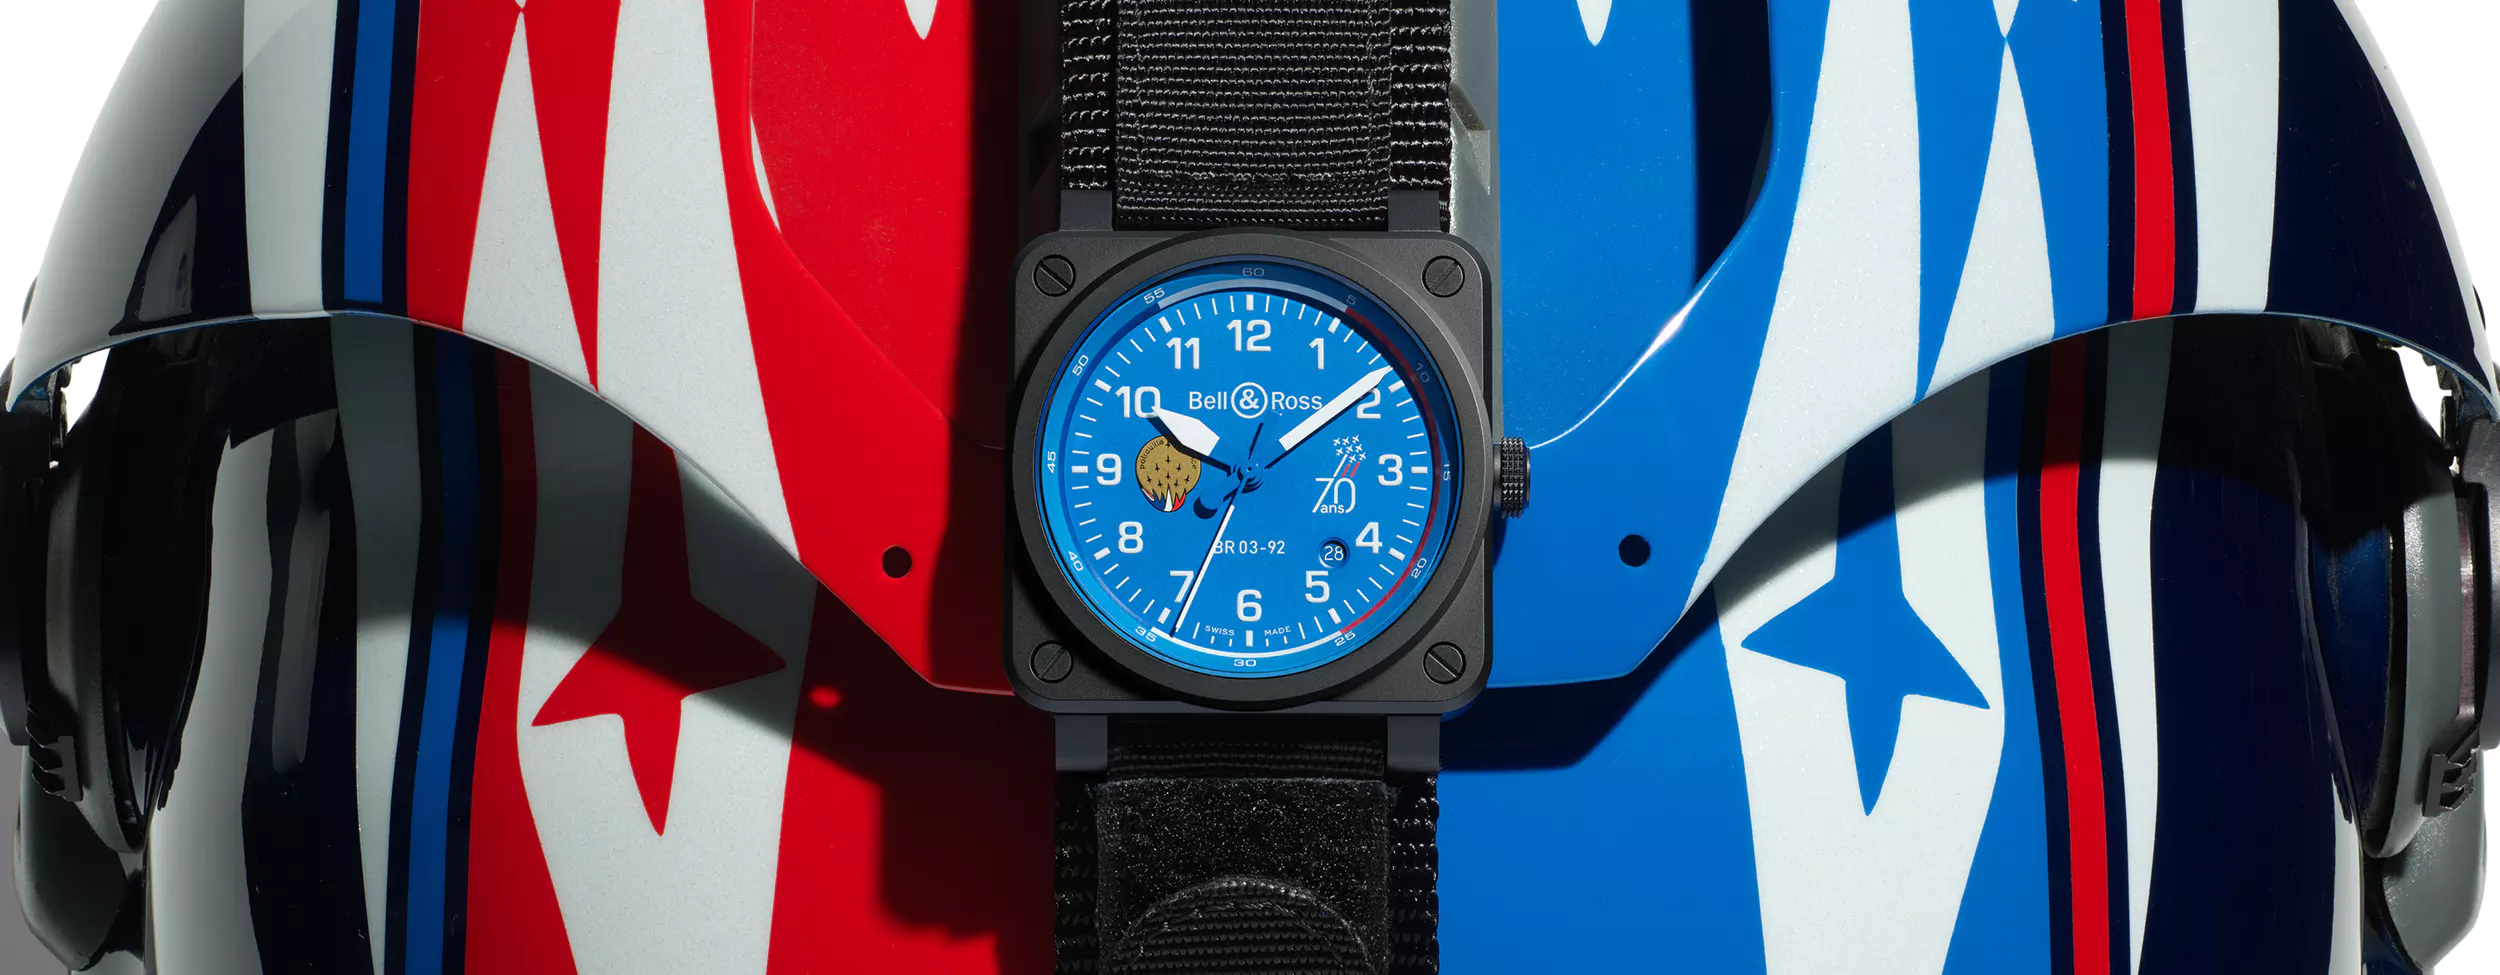 Bell-Ross-BR 03-92-PATROUILLE-DE-FRANCE-70TH-ANNIVERSARY-Banner-For-French-Watch-Brands-Article-Image-Source-and-Copywright-Bell-Ross